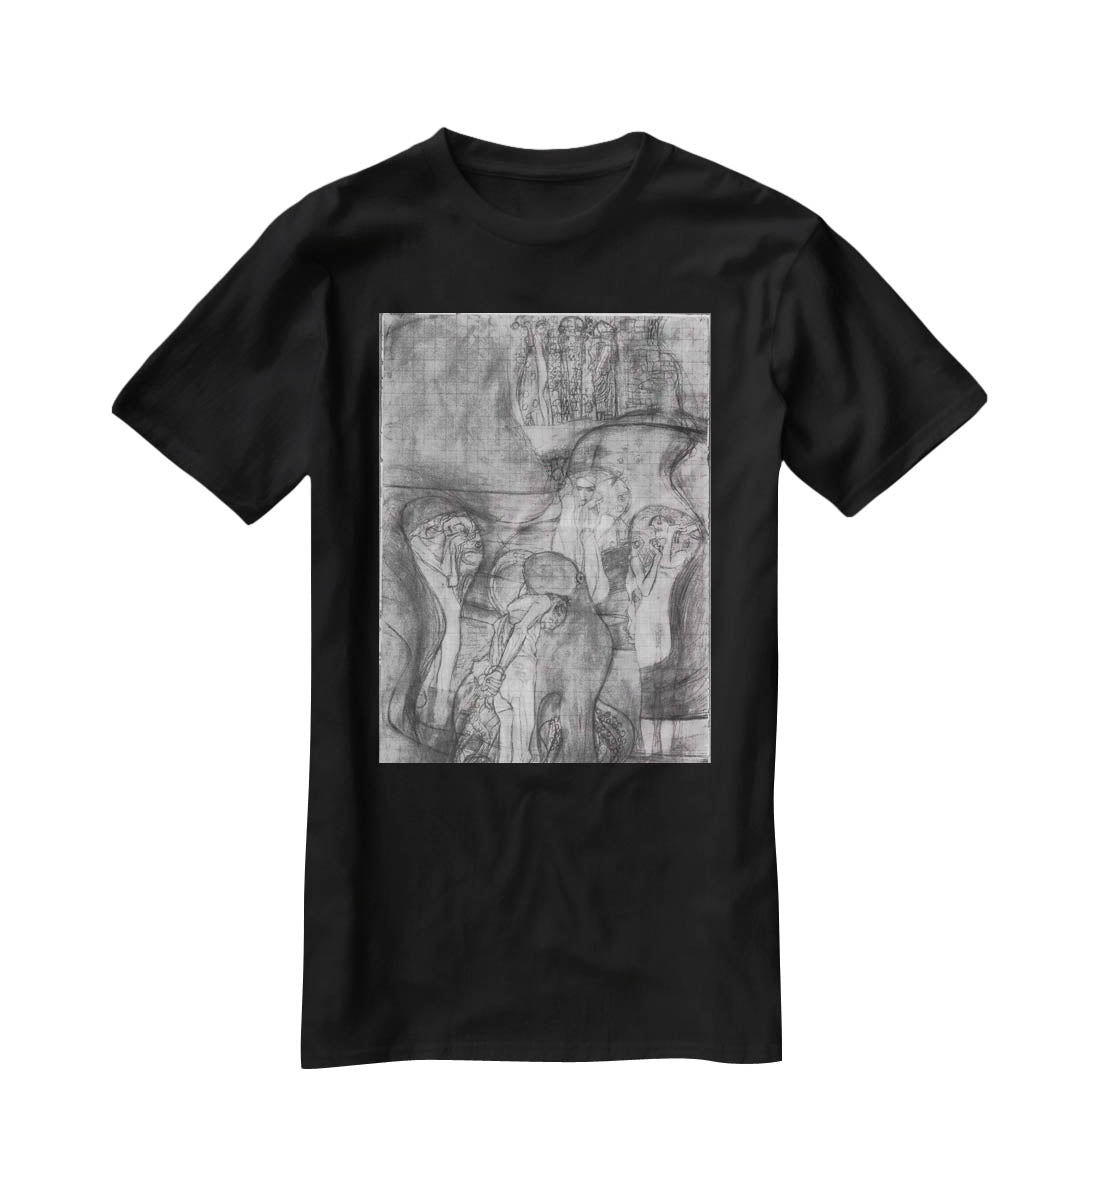 Composition draft of the law faculty image by Klimt T-Shirt - Canvas Art Rocks - 1